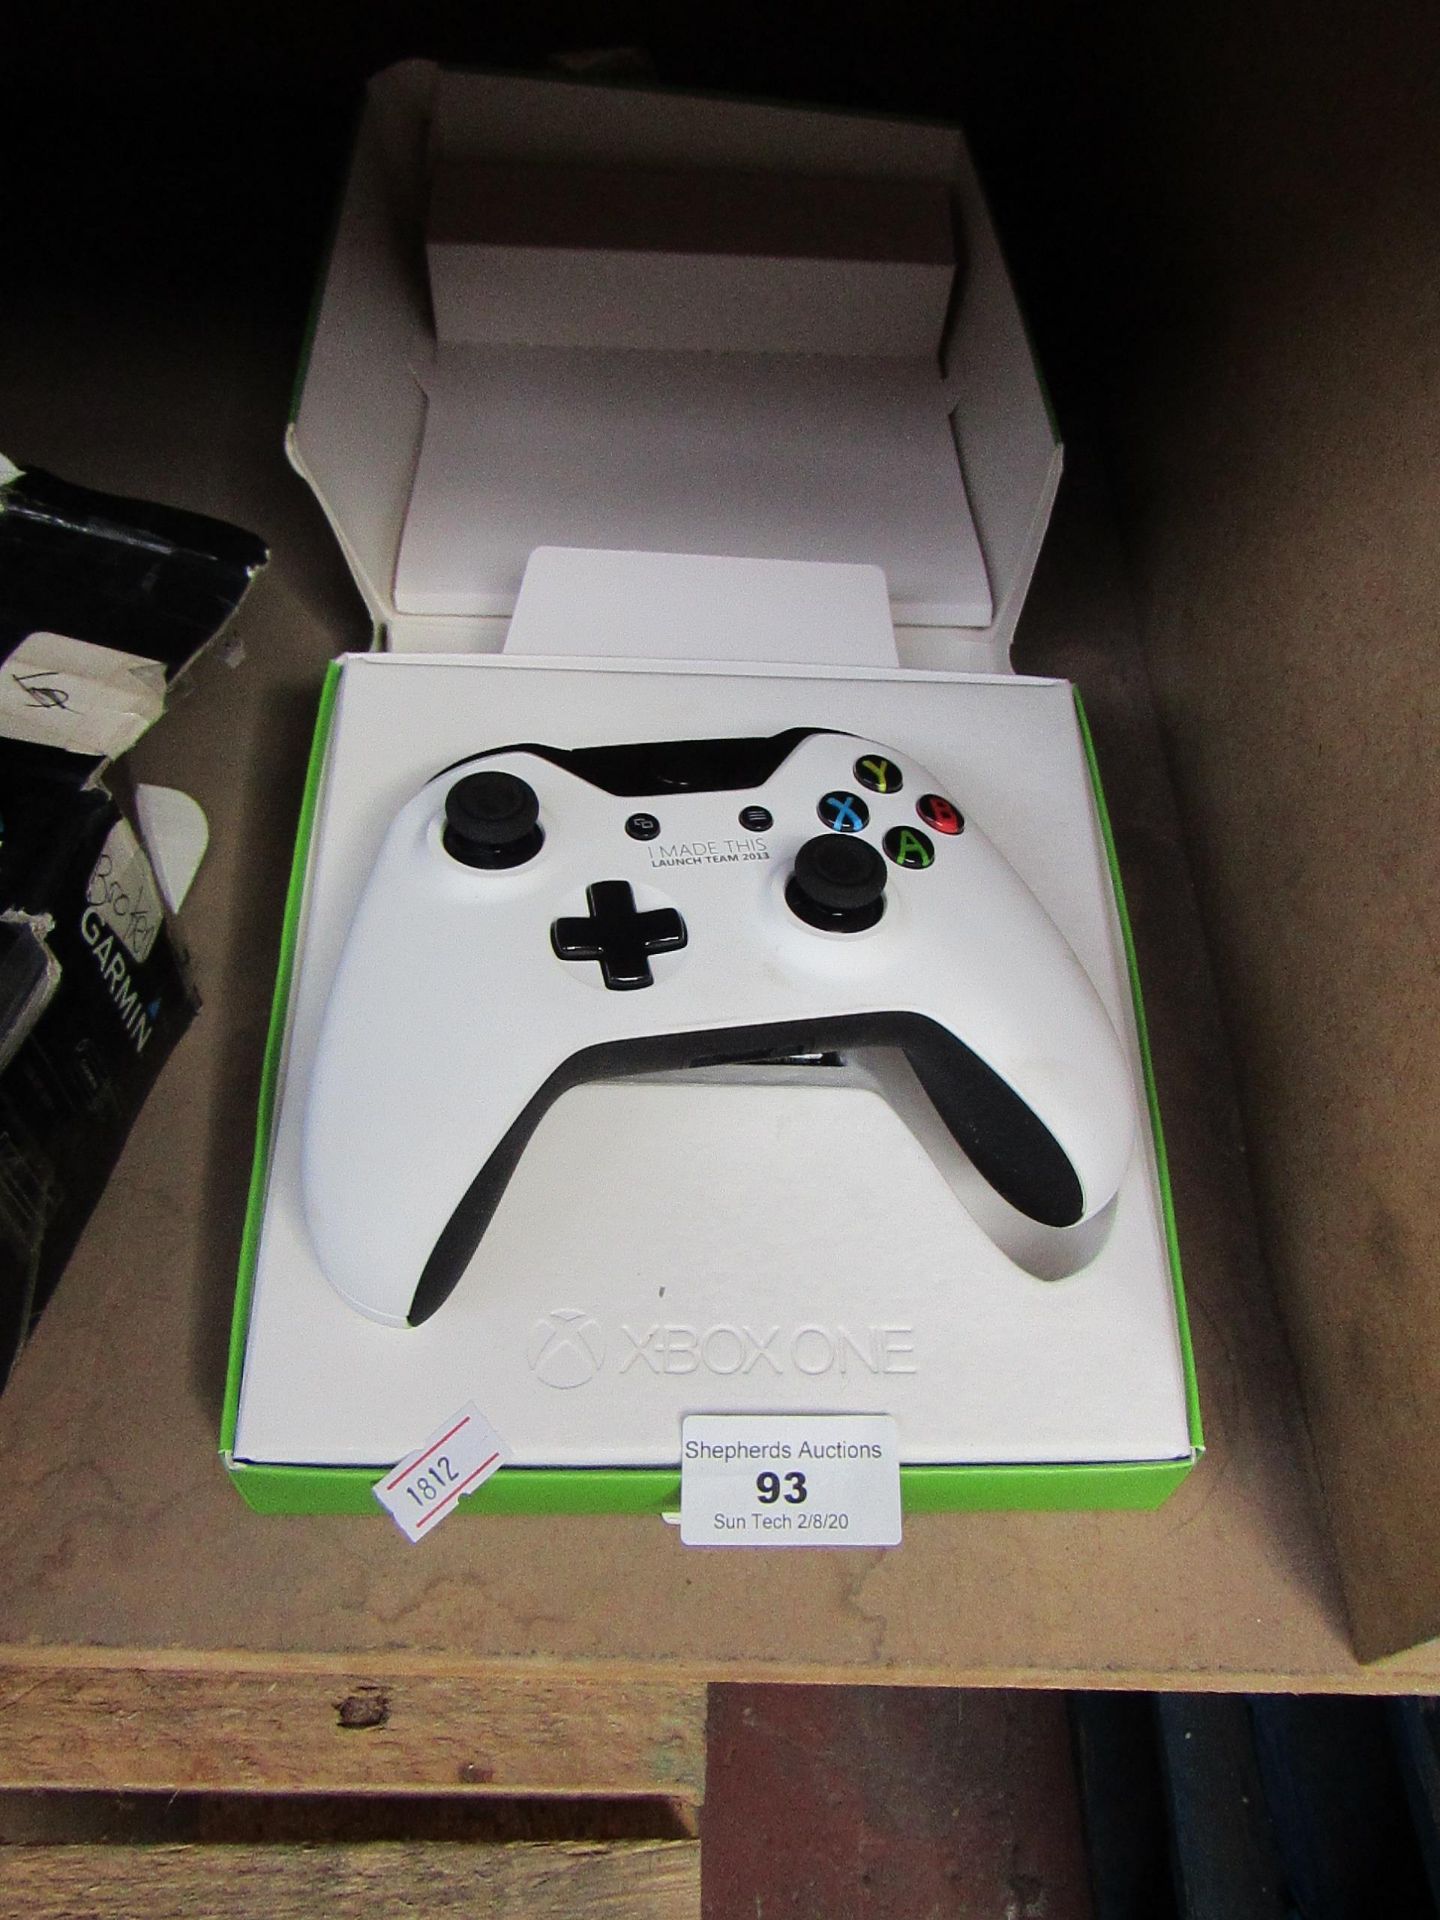 XBOX One Employee Edition "I MADE THIS" controller, untested and boxed.